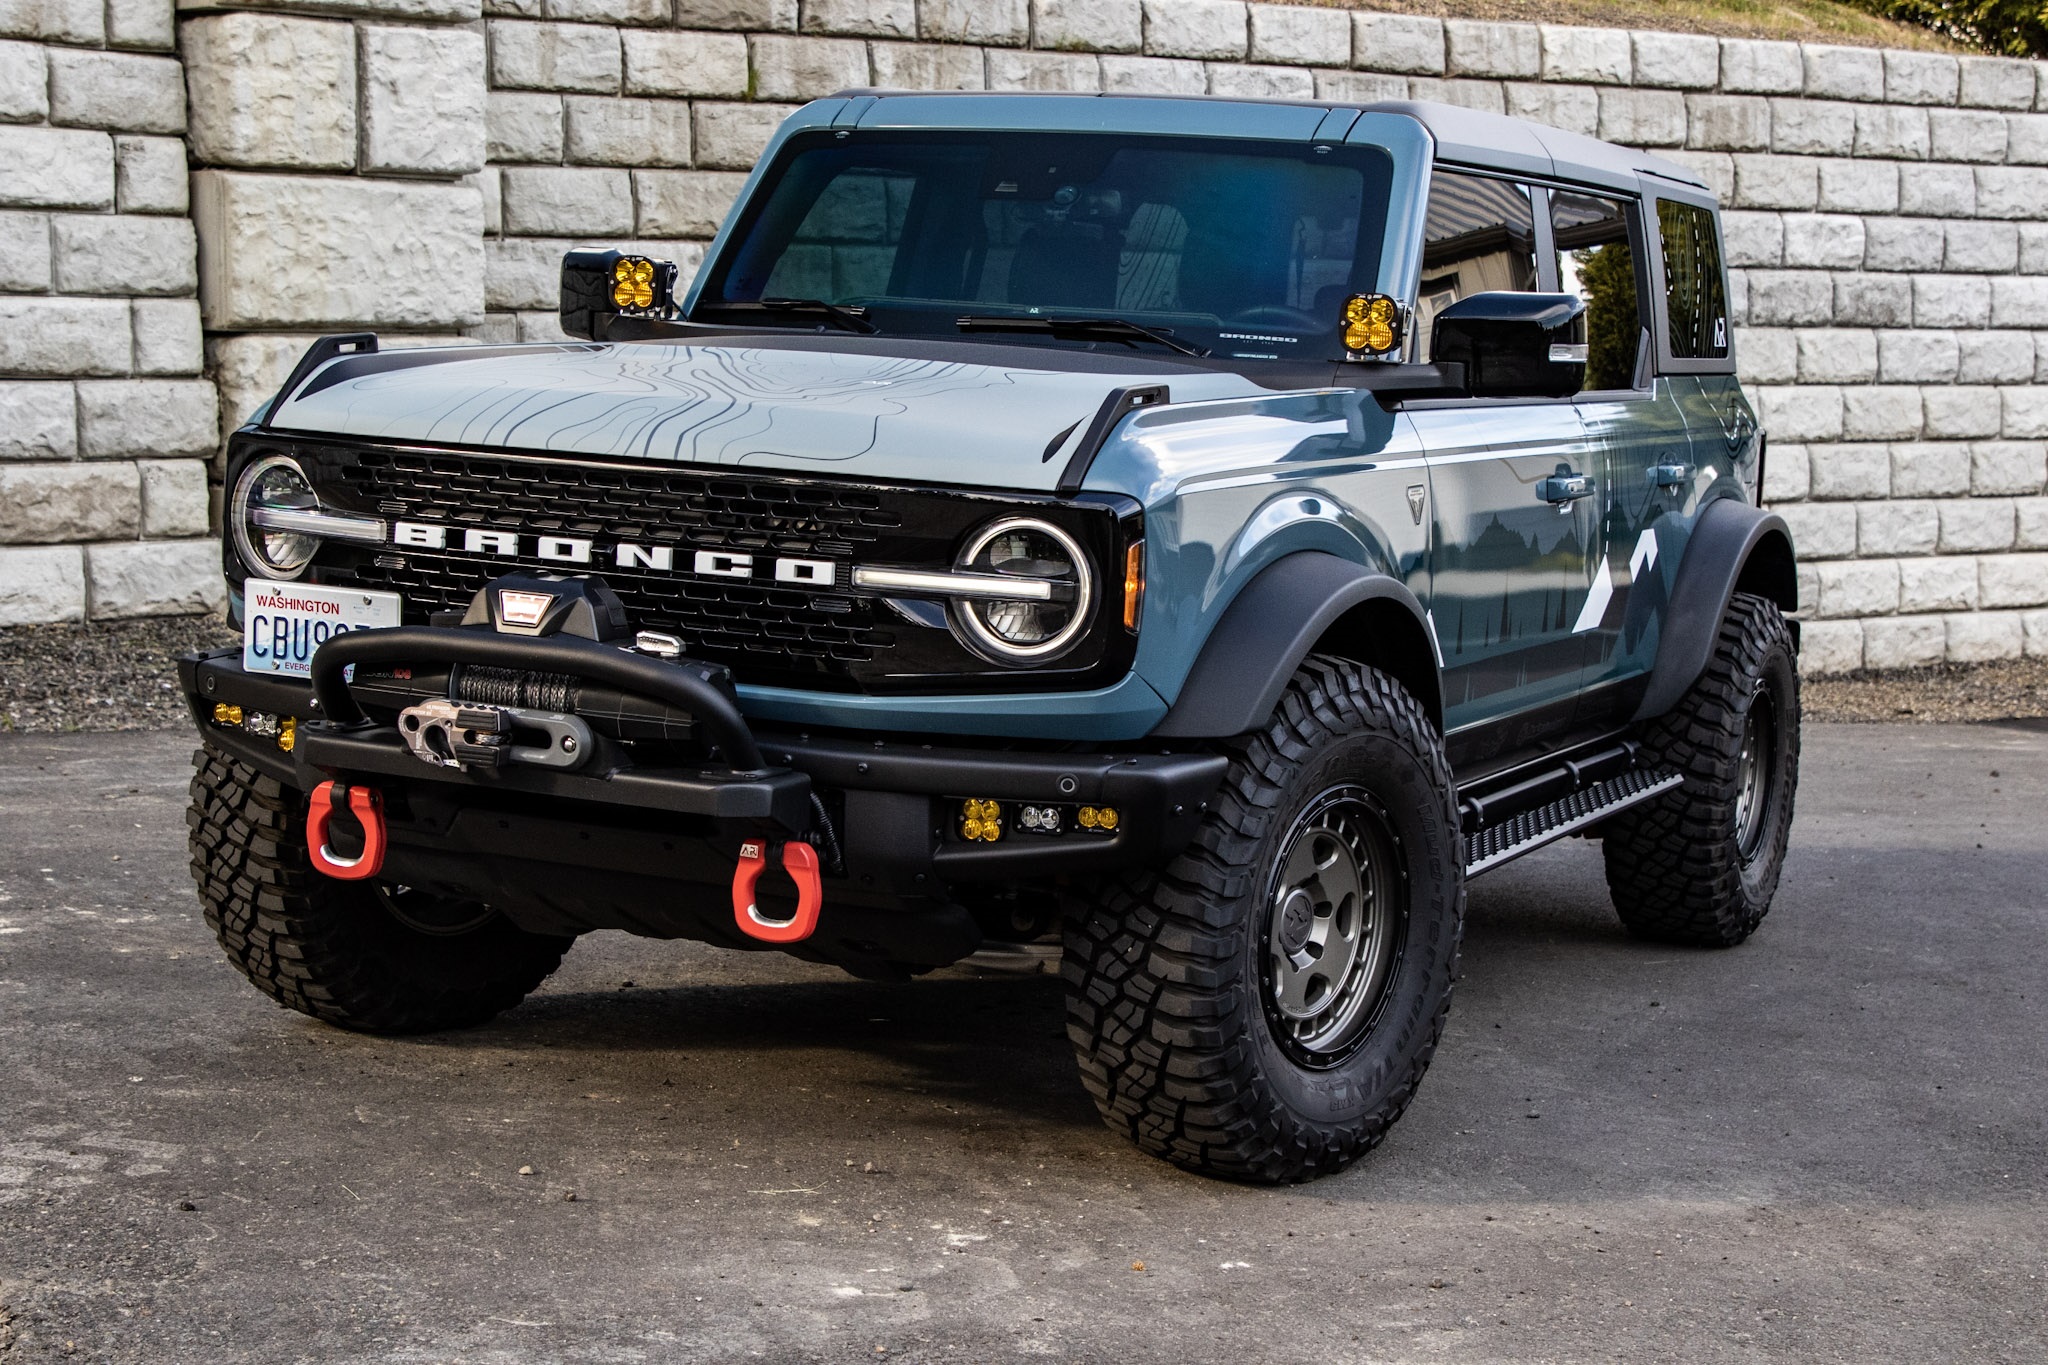 Ford Bronco Have you put Stickers on your Bronco? Let's see them 0V5A2444